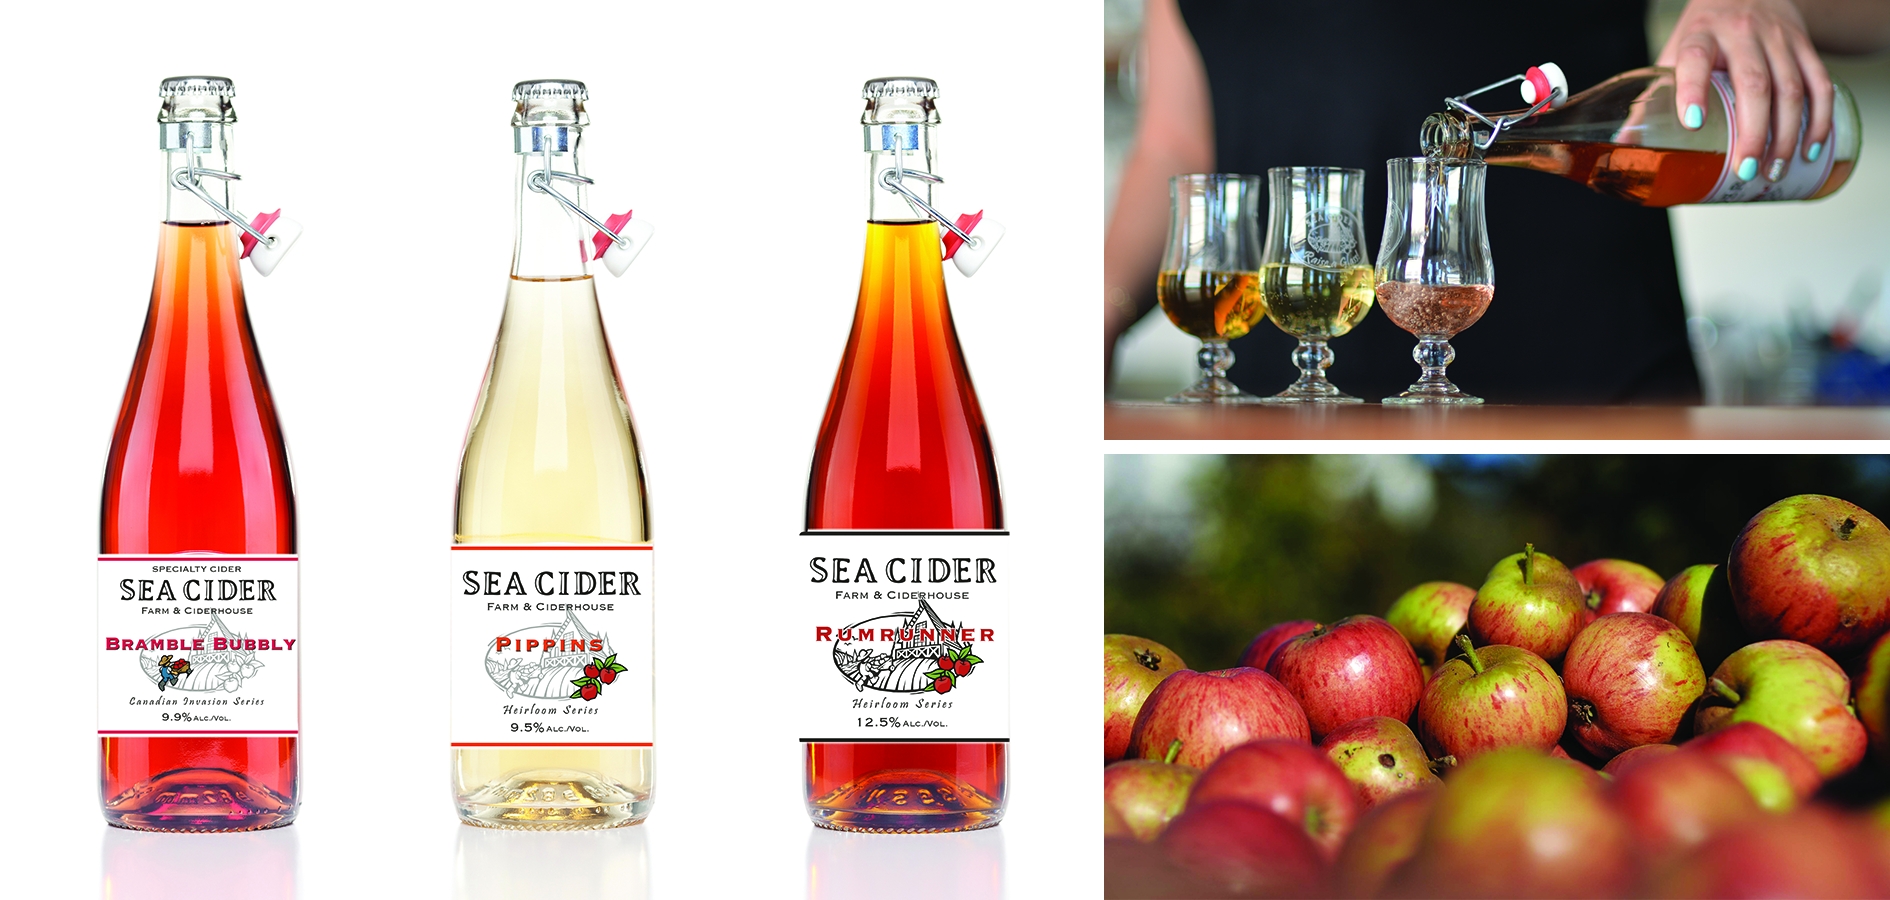 Sea Cider Products image 2017